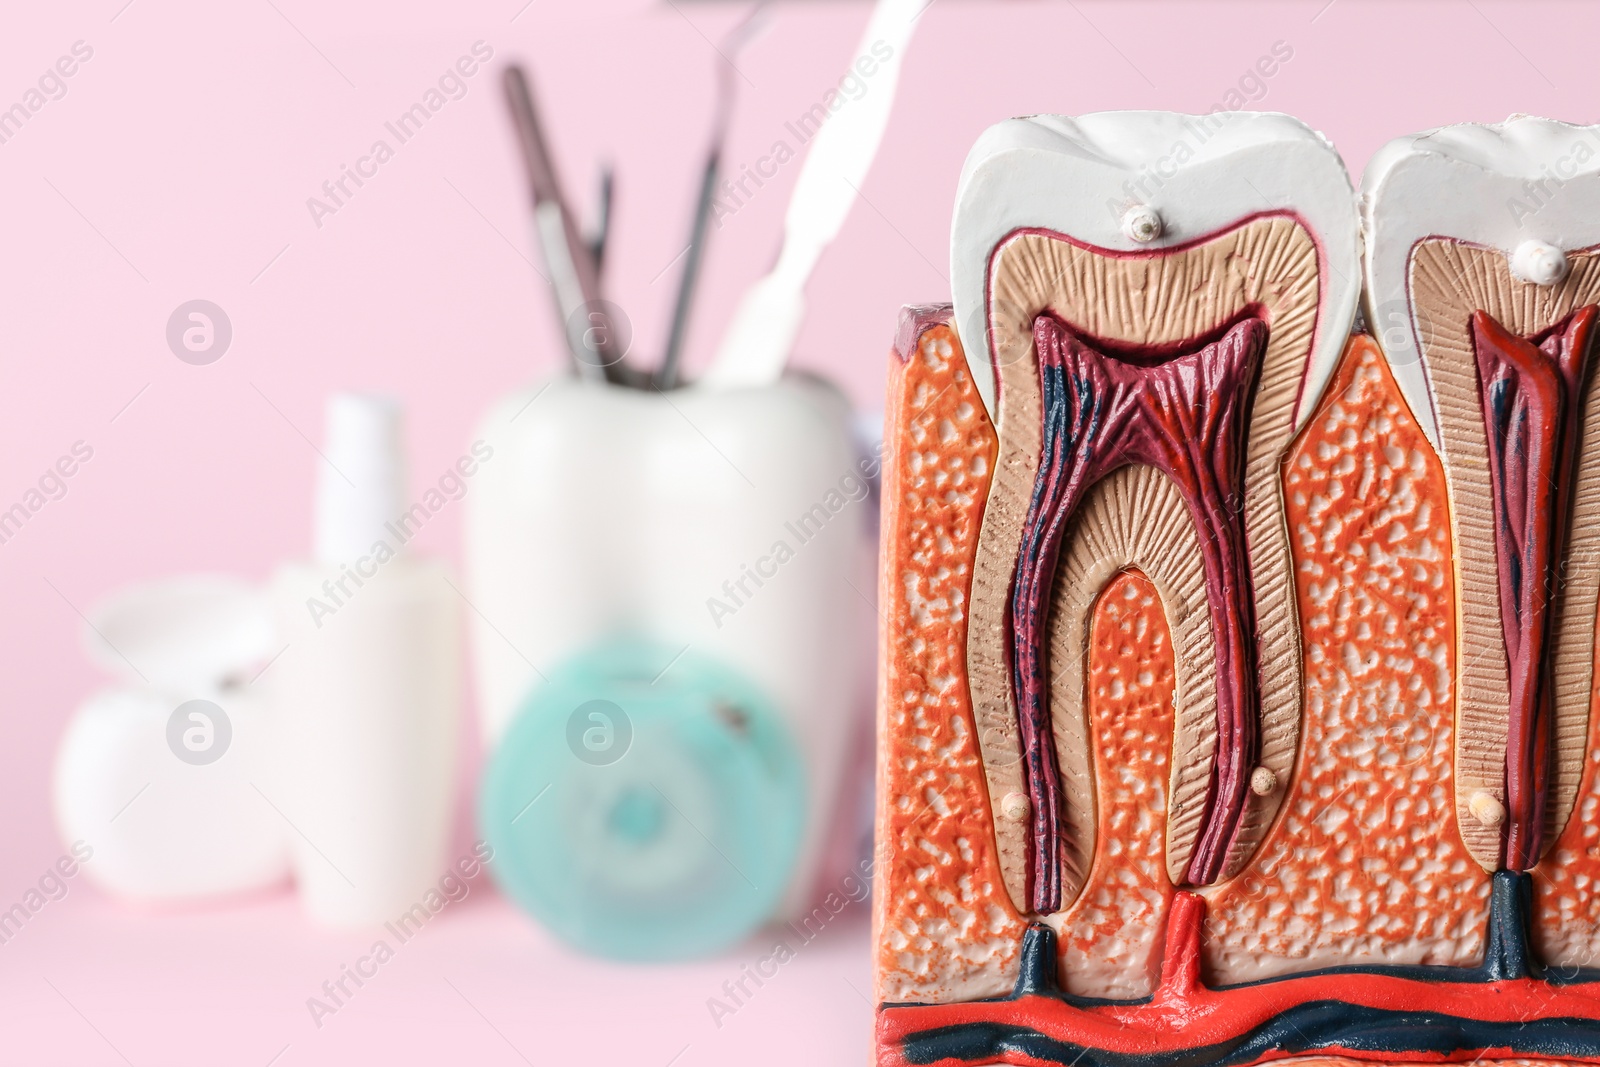 Photo of Educational model of jaw section with teeth and space for text on blurred background, closeup